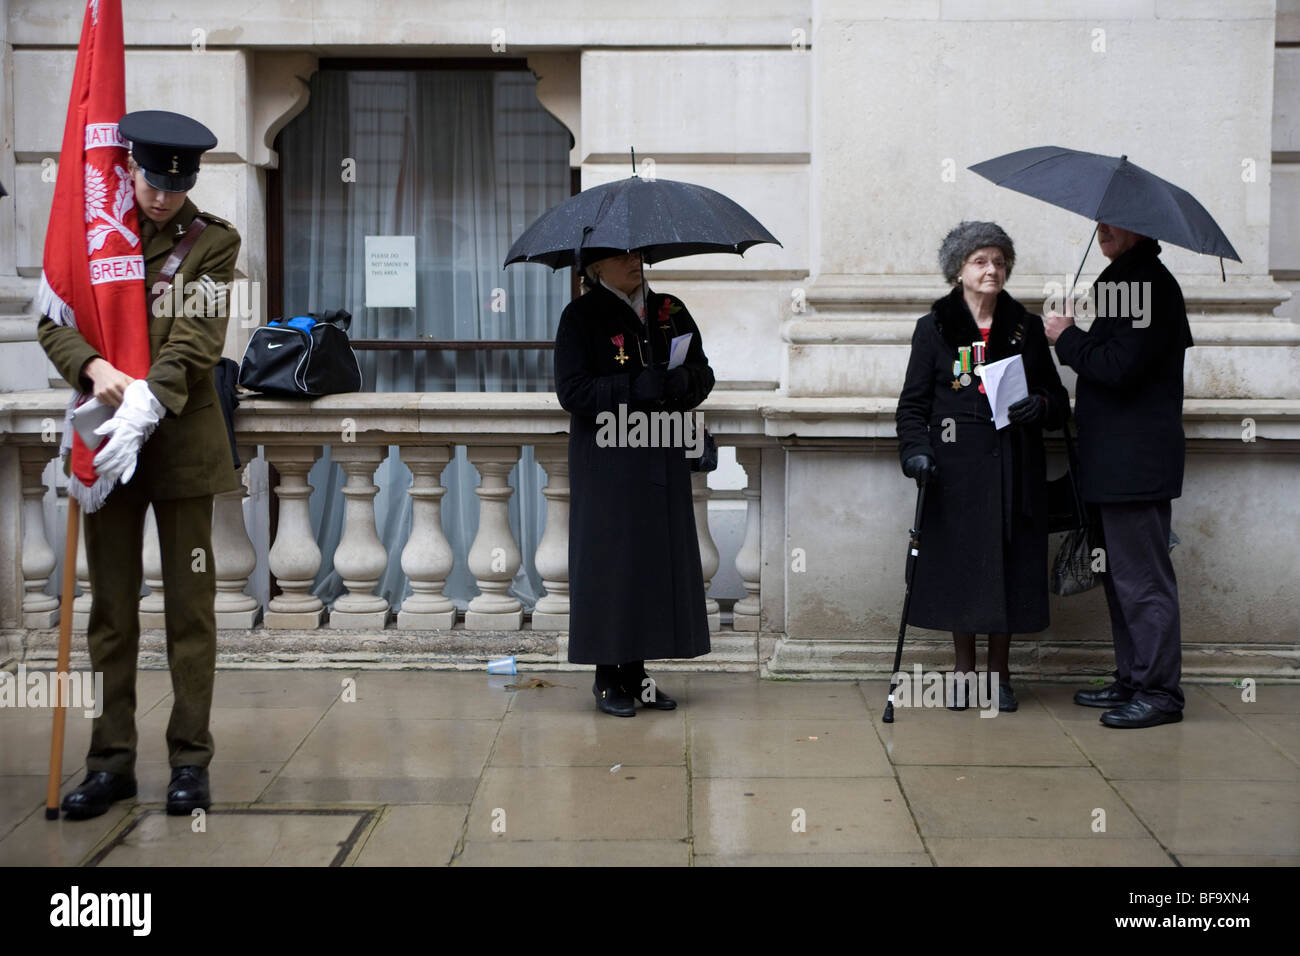 War widows and friends gathered at The Cenotaph in the annual act of Remembrance for those killed in Wars Stock Photo